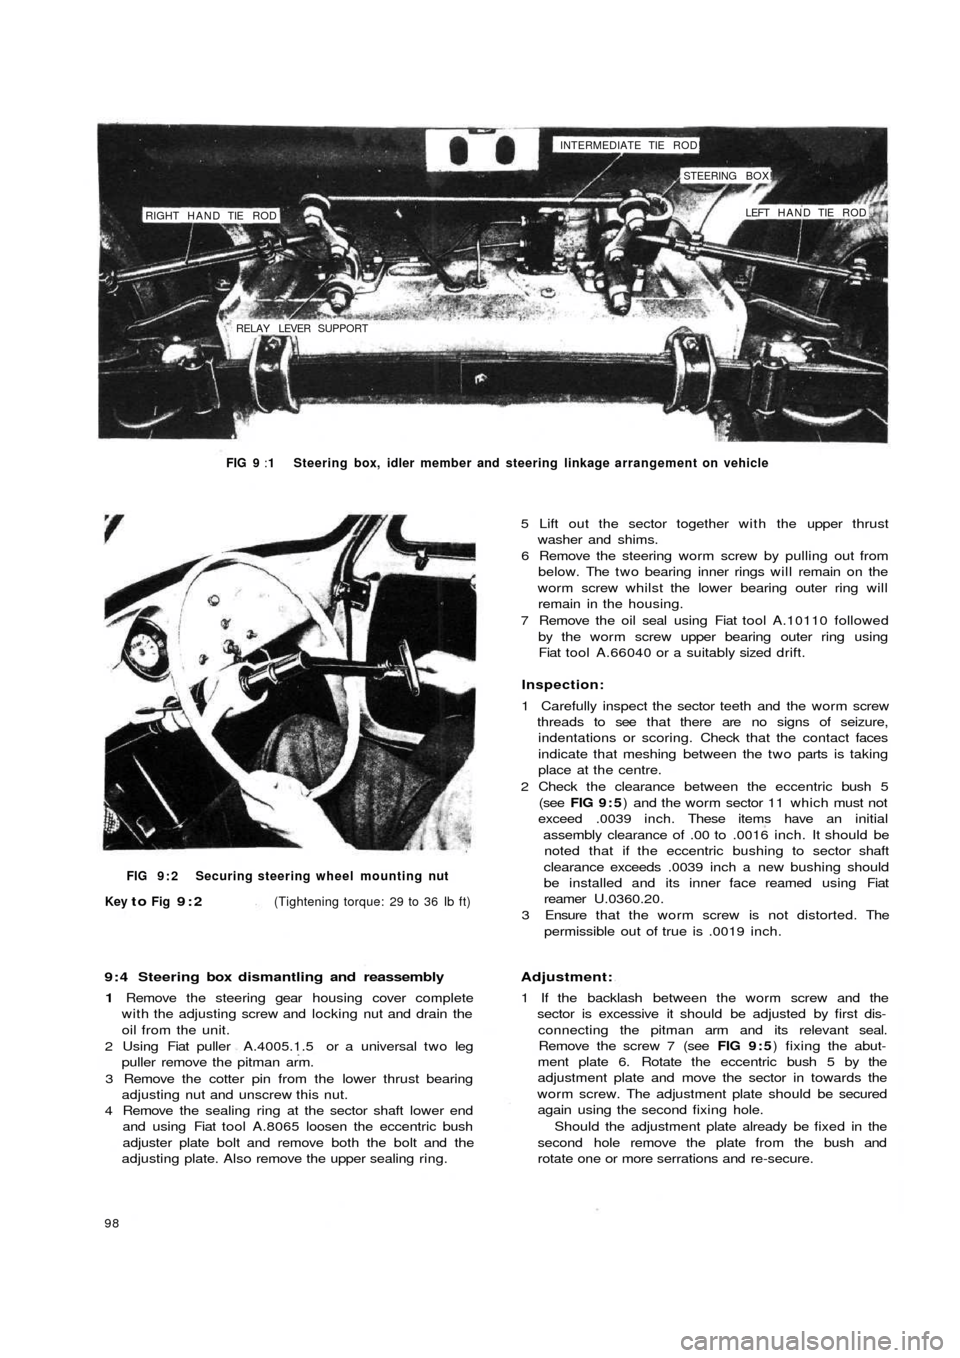 FIAT 500 1969 1.G Workshop Manual RIGHT HAND TIE  ROD
RELAY LEVER  SUPPORTINTERMEDIATE TIE ROD!
STEERING BOX!
LEFT  HAND TIE  ROD
FIG 9 :1 Steering box, idler member and steering linkage arrangement on vehicle
FIG 9 : 2  Securing stee